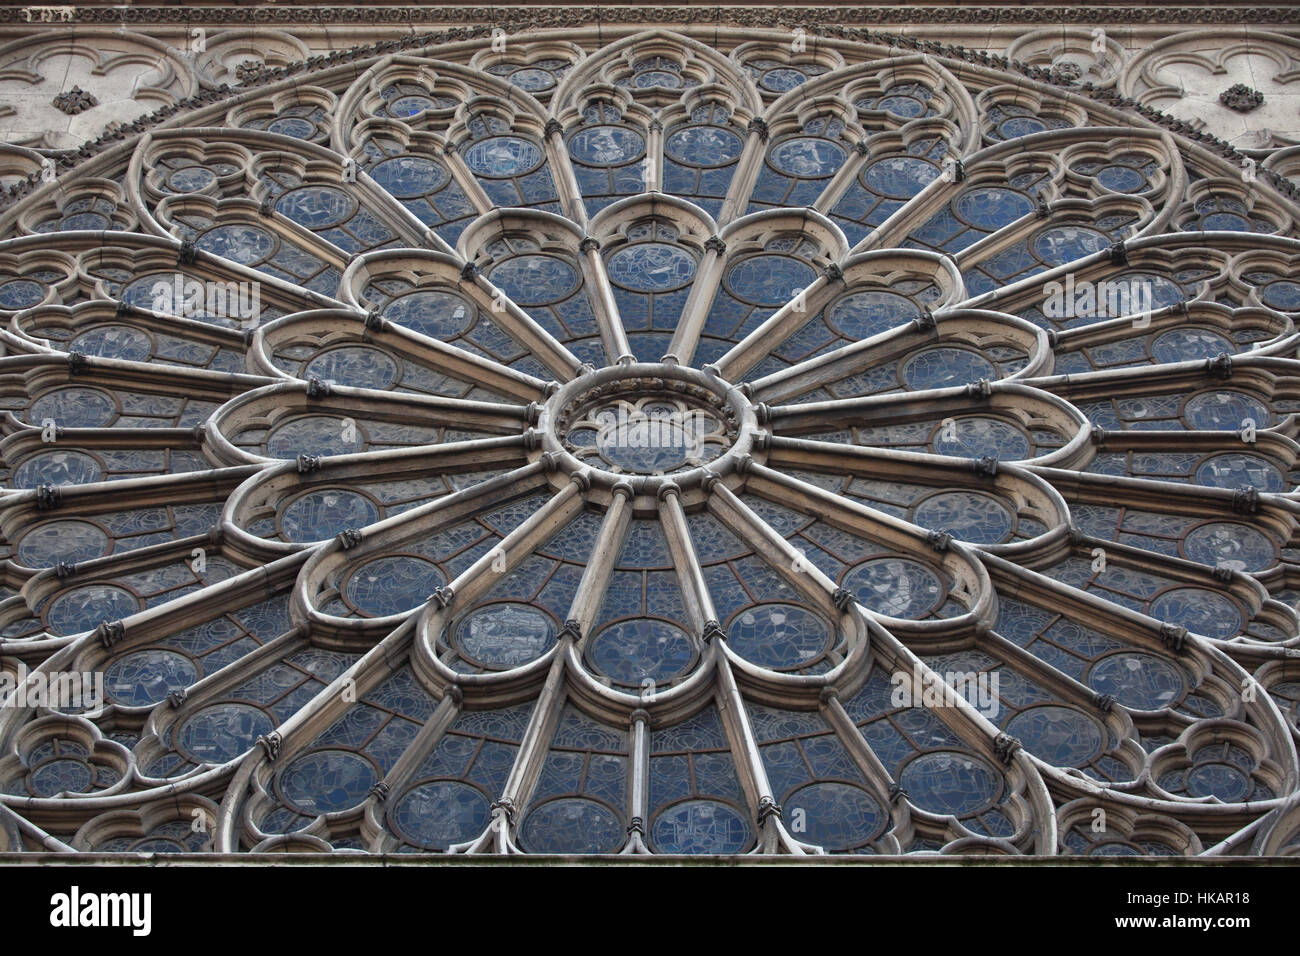 North rose window of the Notre-Dame Cathedral (Notre-Dame de Paris) in Paris, France. Stock Photo